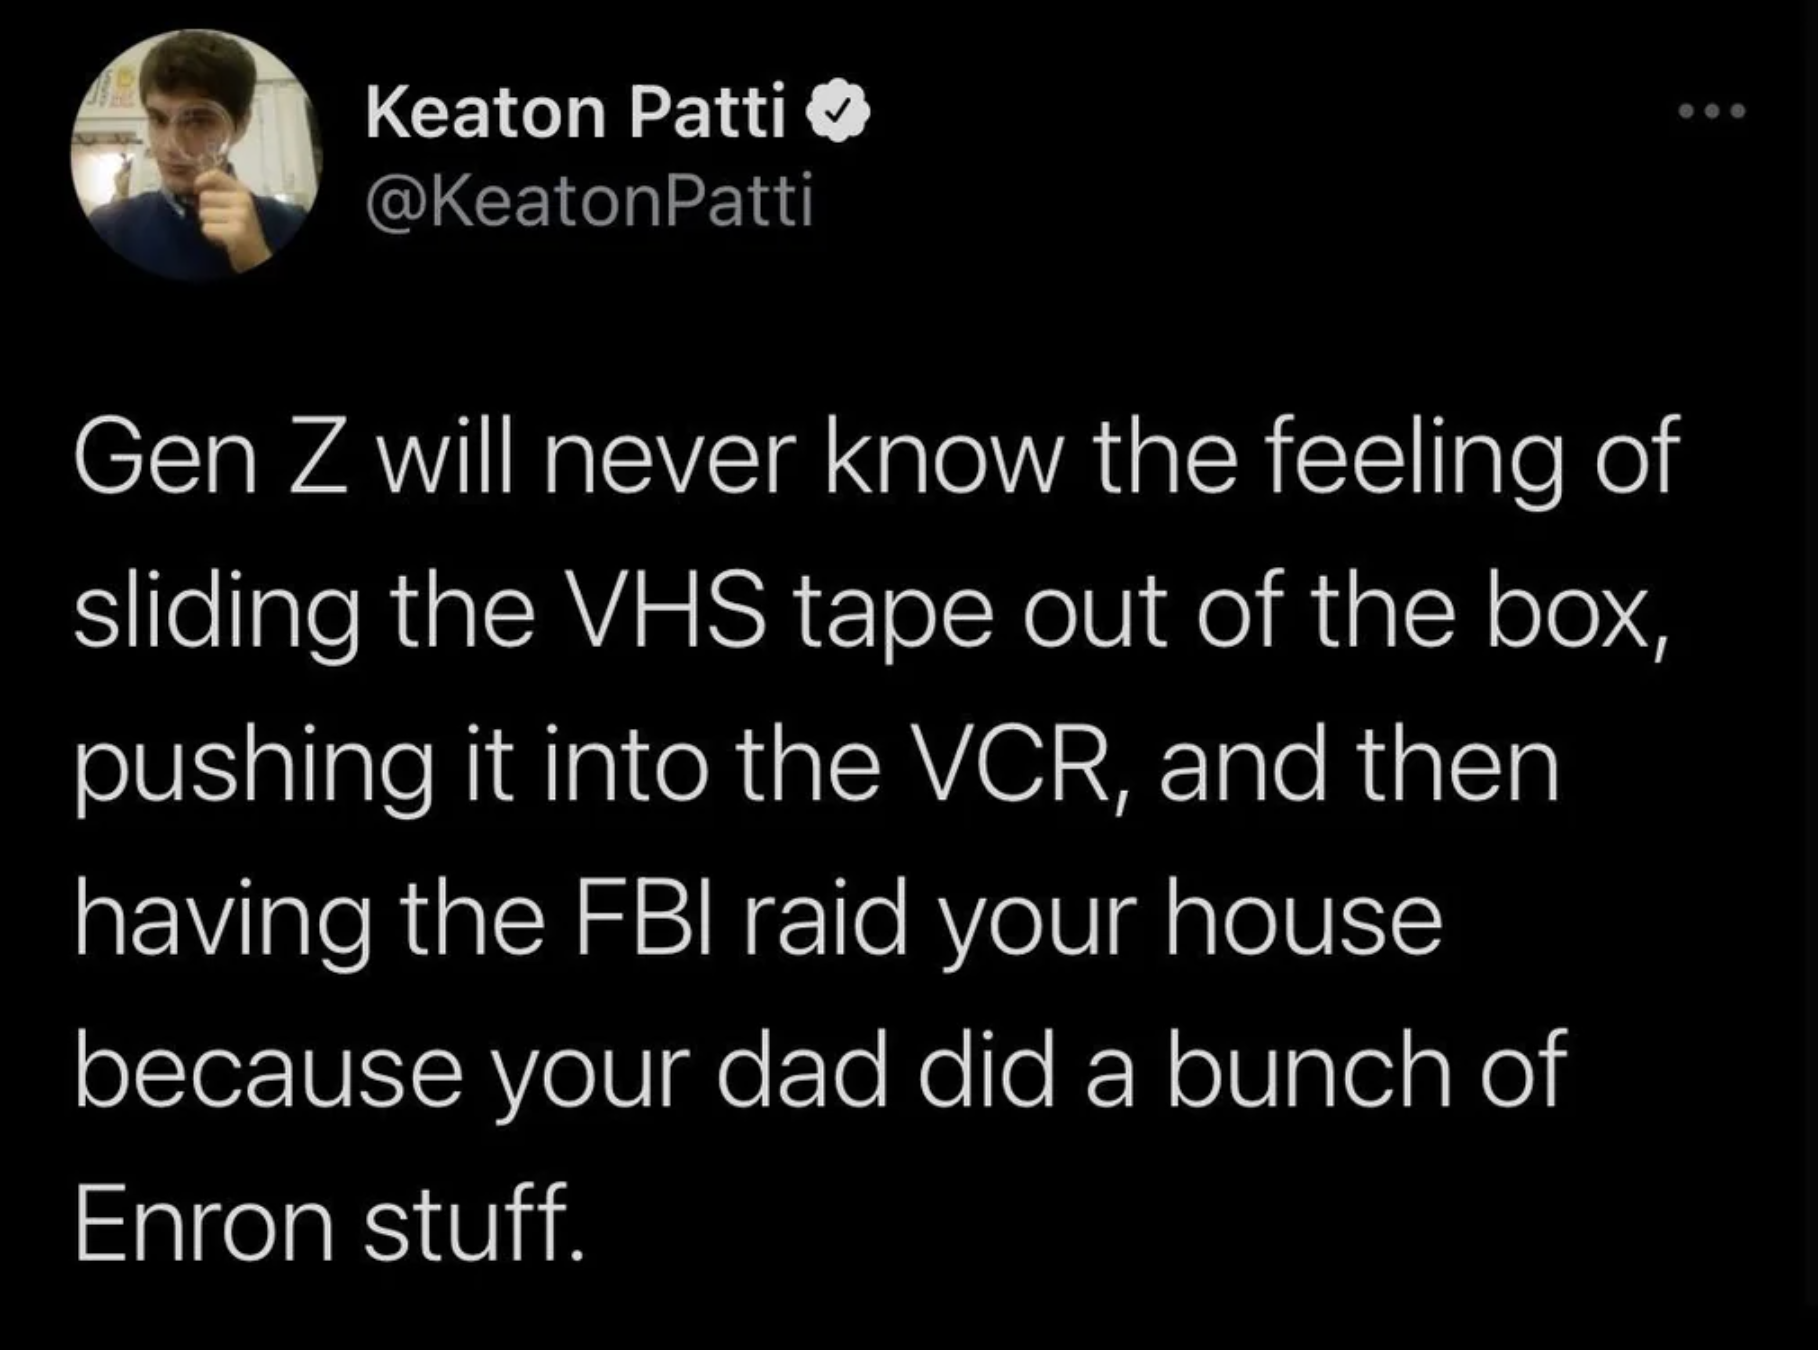 screenshot - Keaton Patti Gen Z will never know the feeling of sliding the Vhs tape out of the box, pushing it into the Vcr, and then having the Fbi raid your house because your dad did a bunch of Enron stuff.